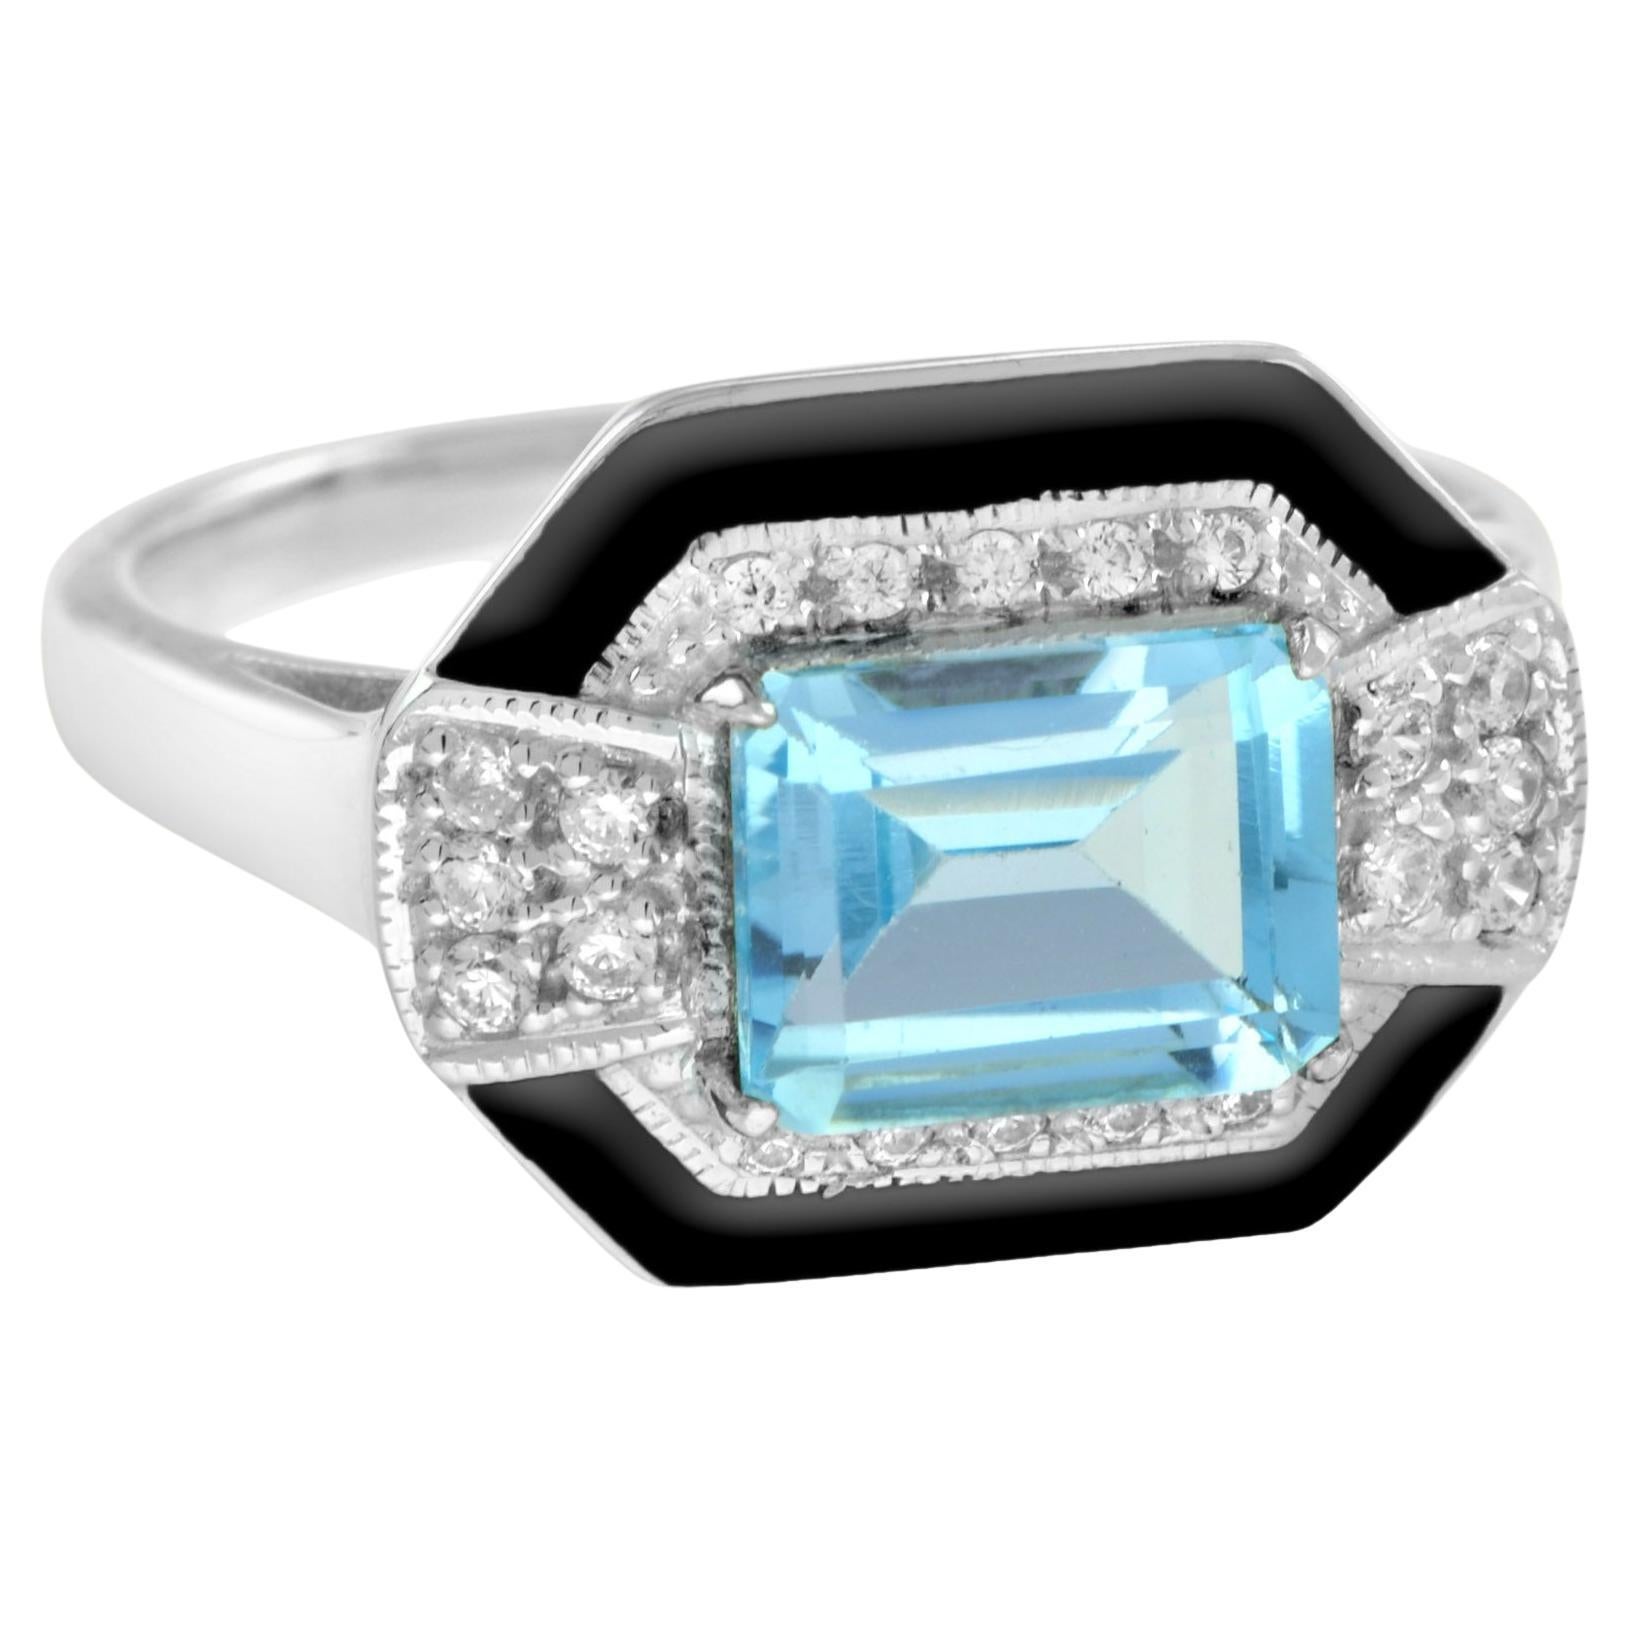 Blue Topaz Emerald Cut with Diamond and Black Enamel Ring in 18K White Gold